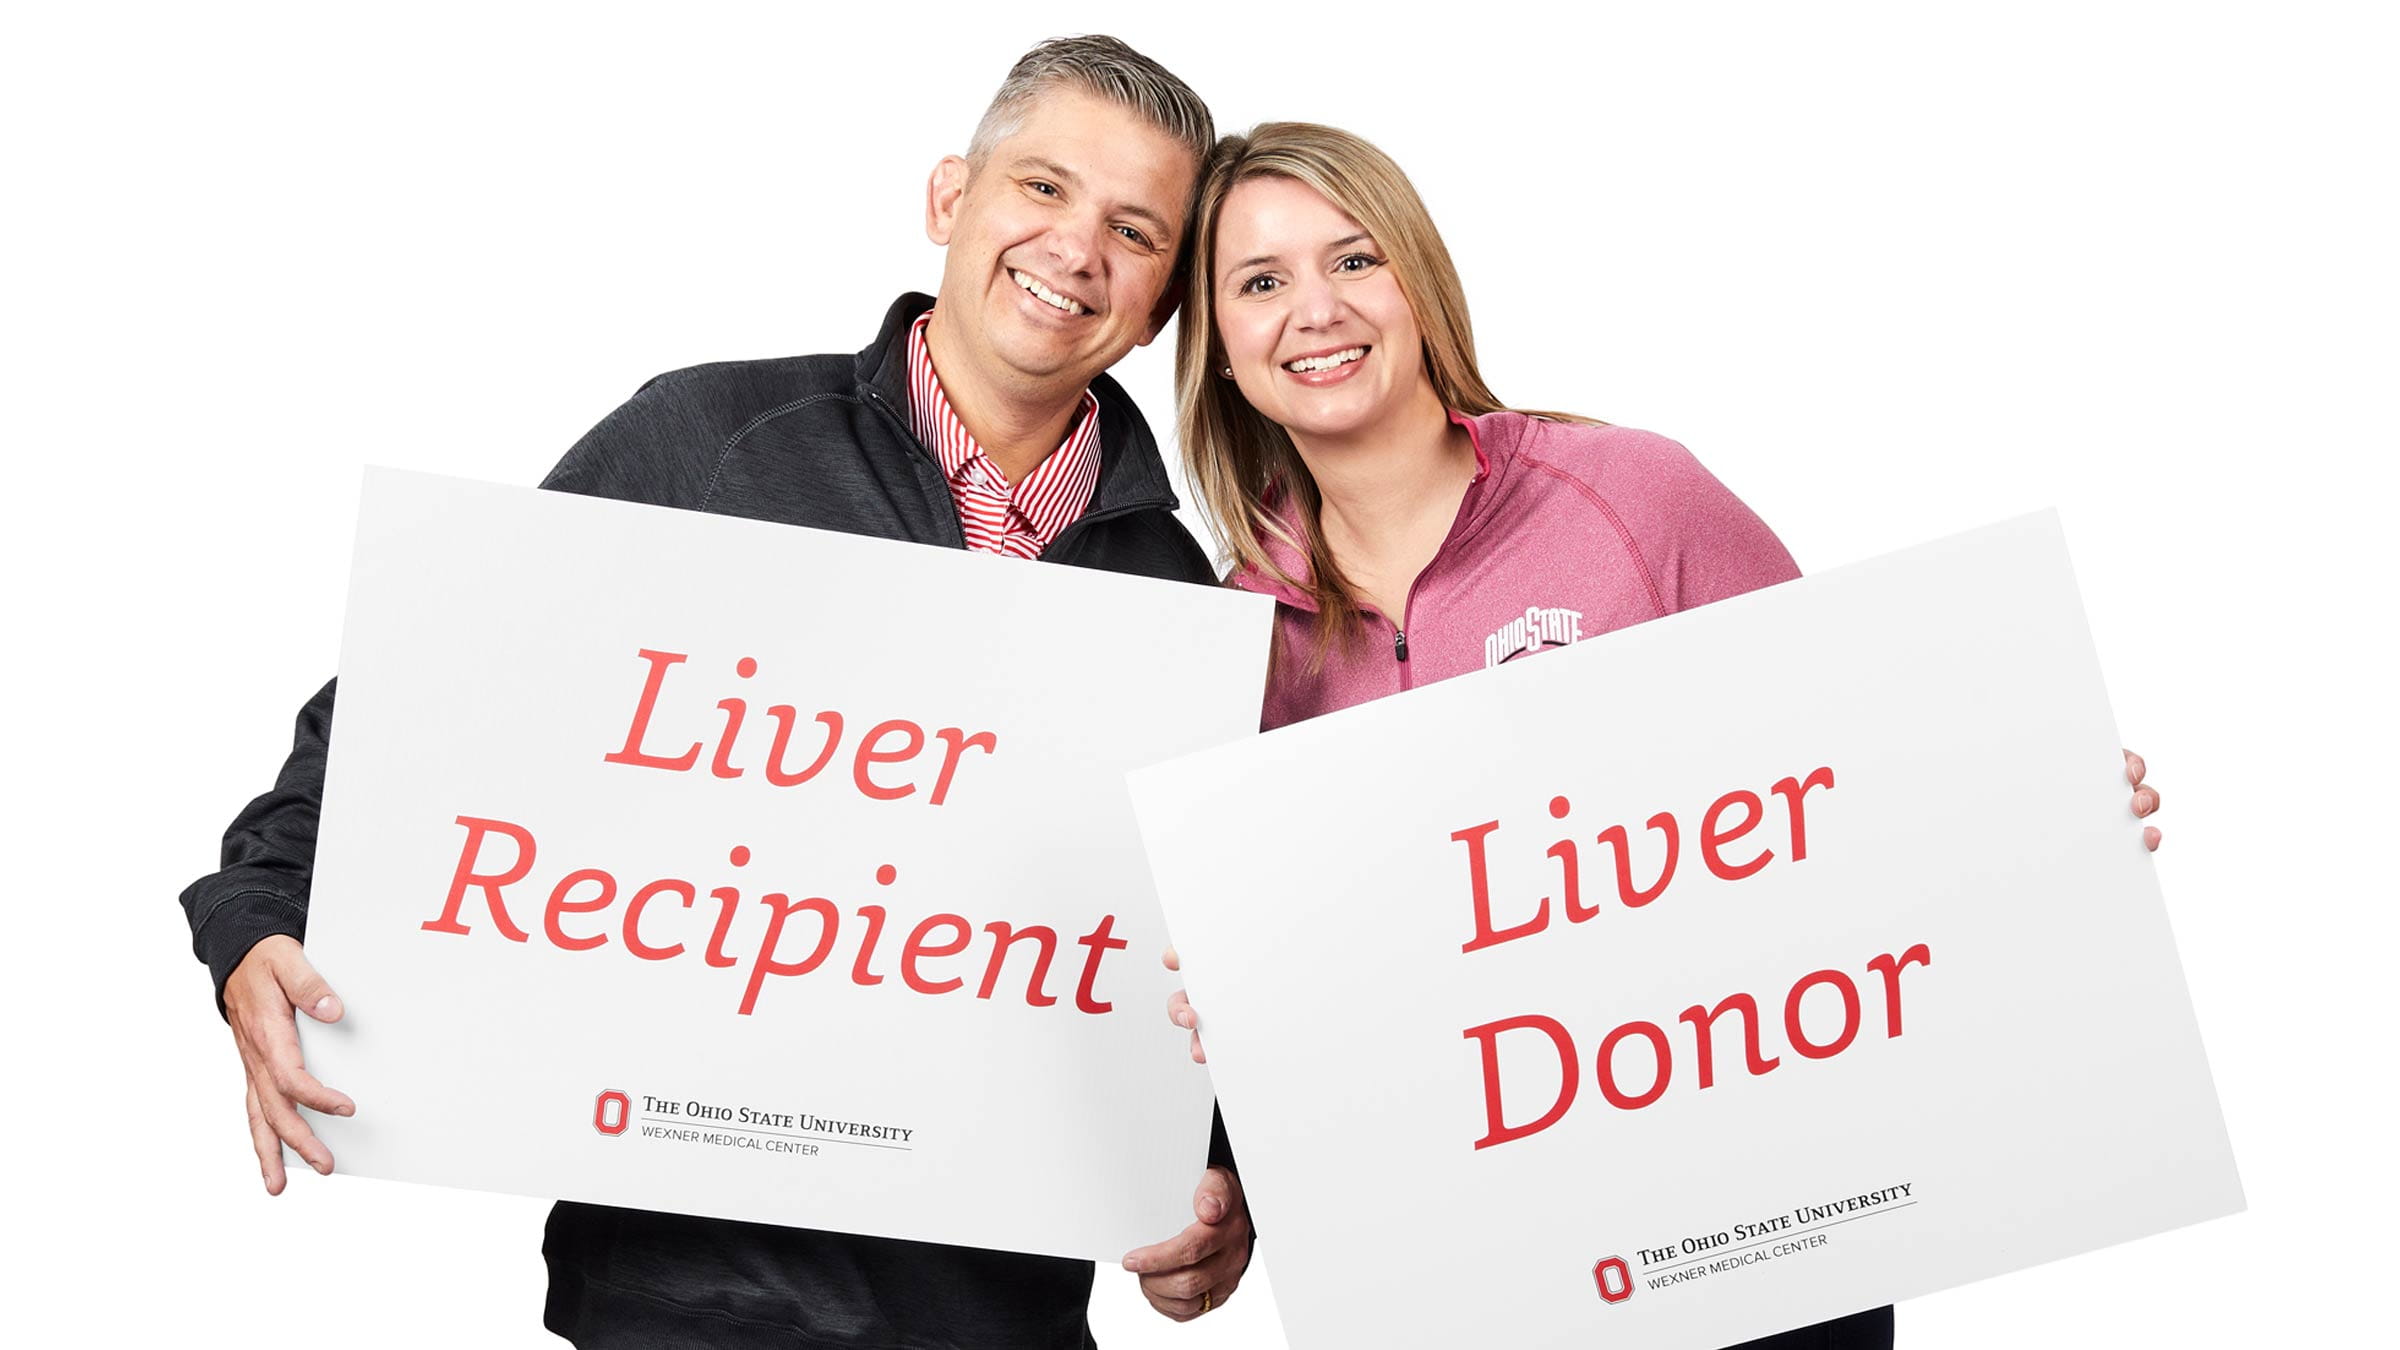 Everything you need to know about living kidney and living liver donation